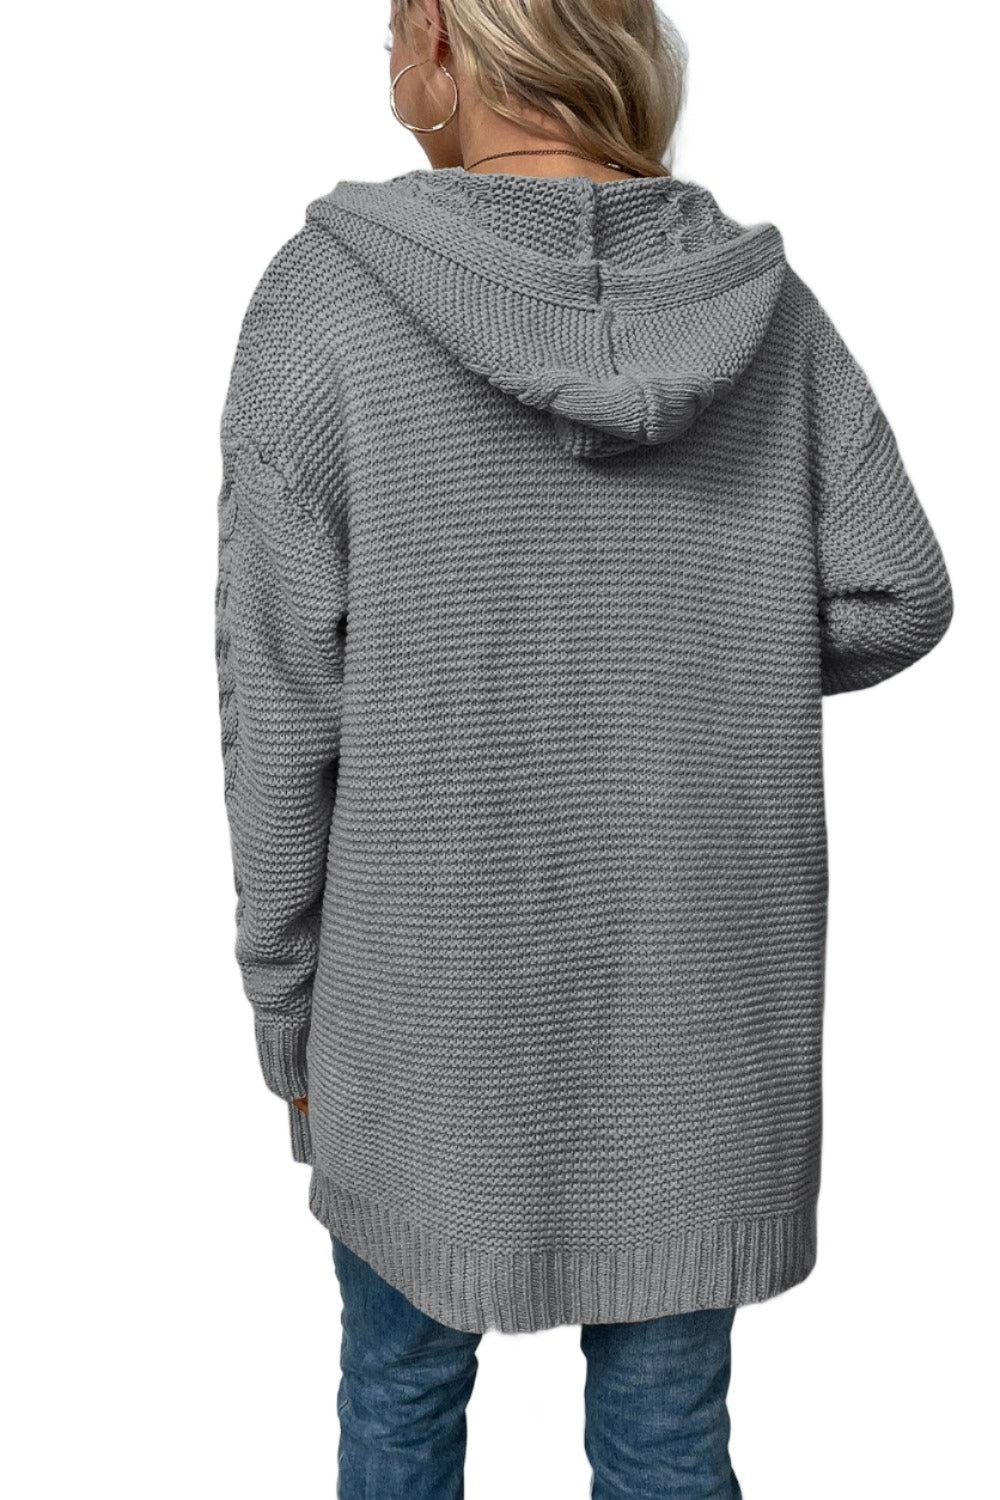 Women's Sweaters - Cardigans Cable-Knit Dropped Shoulder Hooded Cardigan